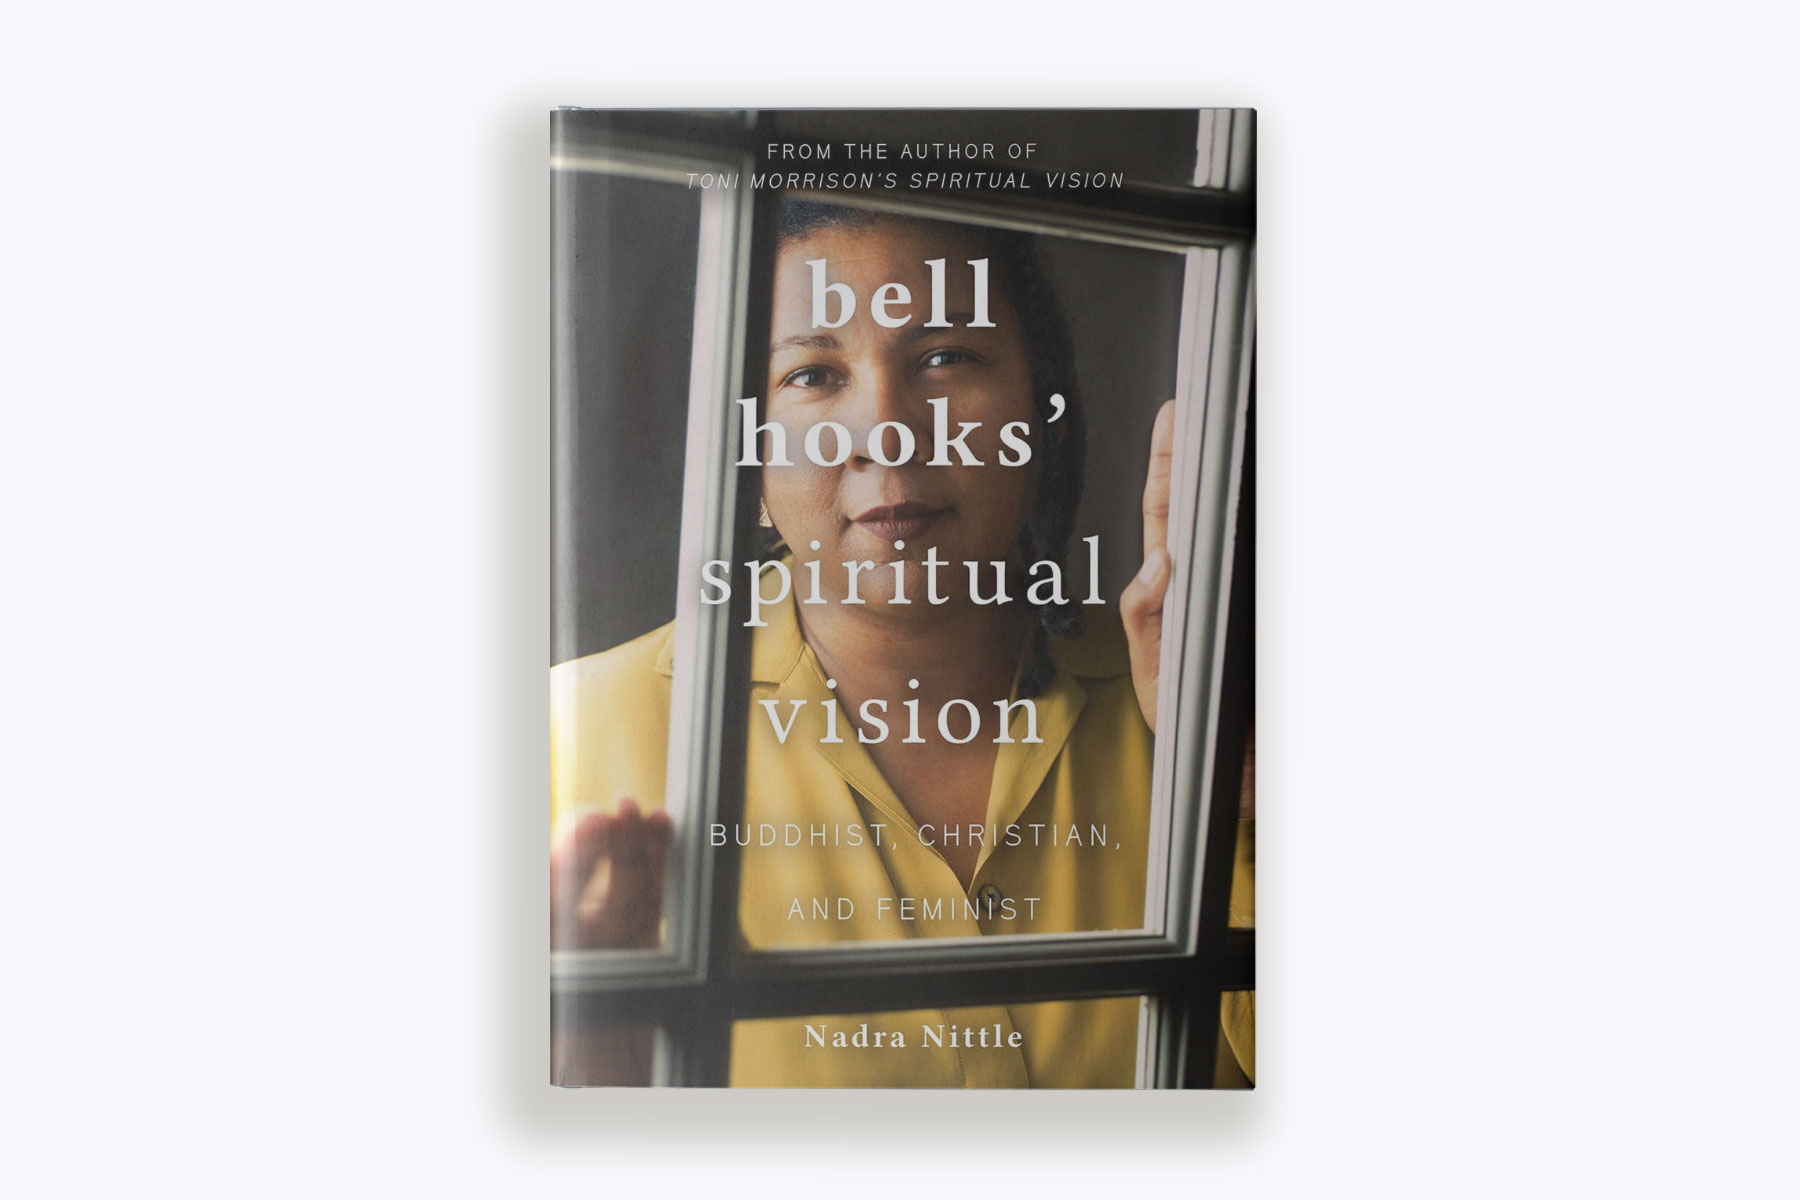 Author and The 19th's Education Reporter, Nadra Nittle's book, "Bell Hooks' Spiritual Vision".